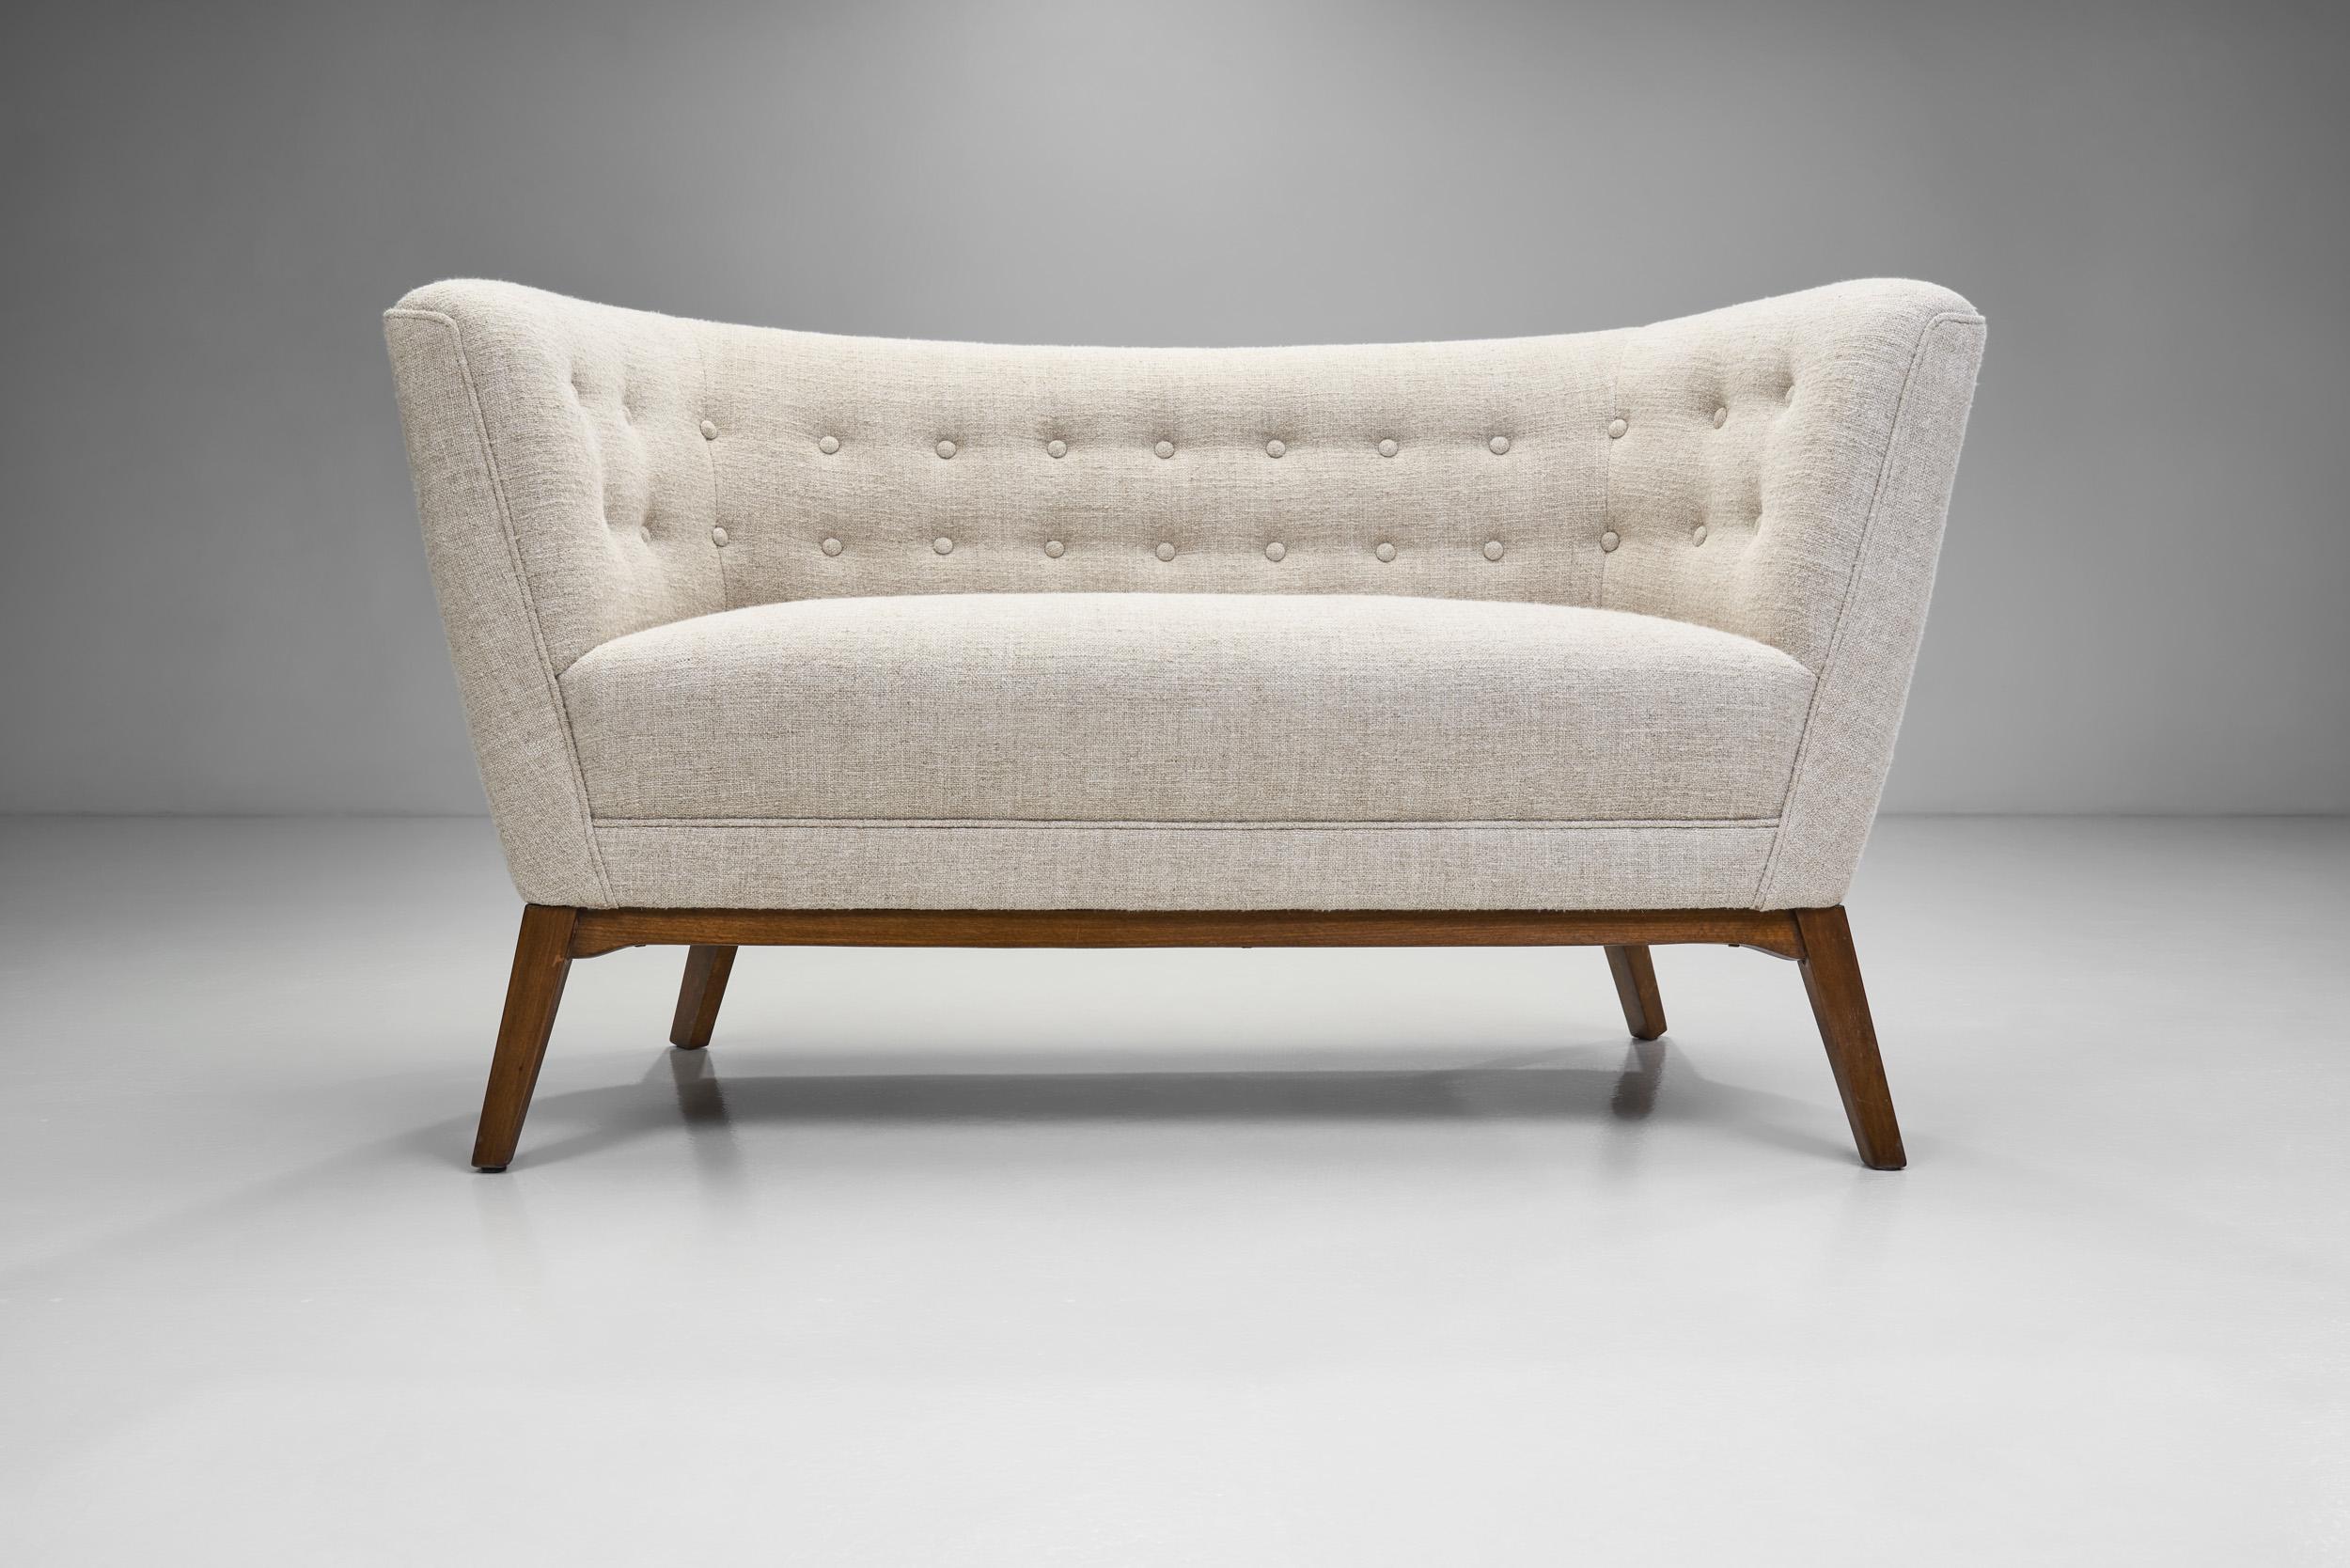 Wool Danish Upholstered Two-Seater Sofa with Beech Legs, Denmark ca 1950s